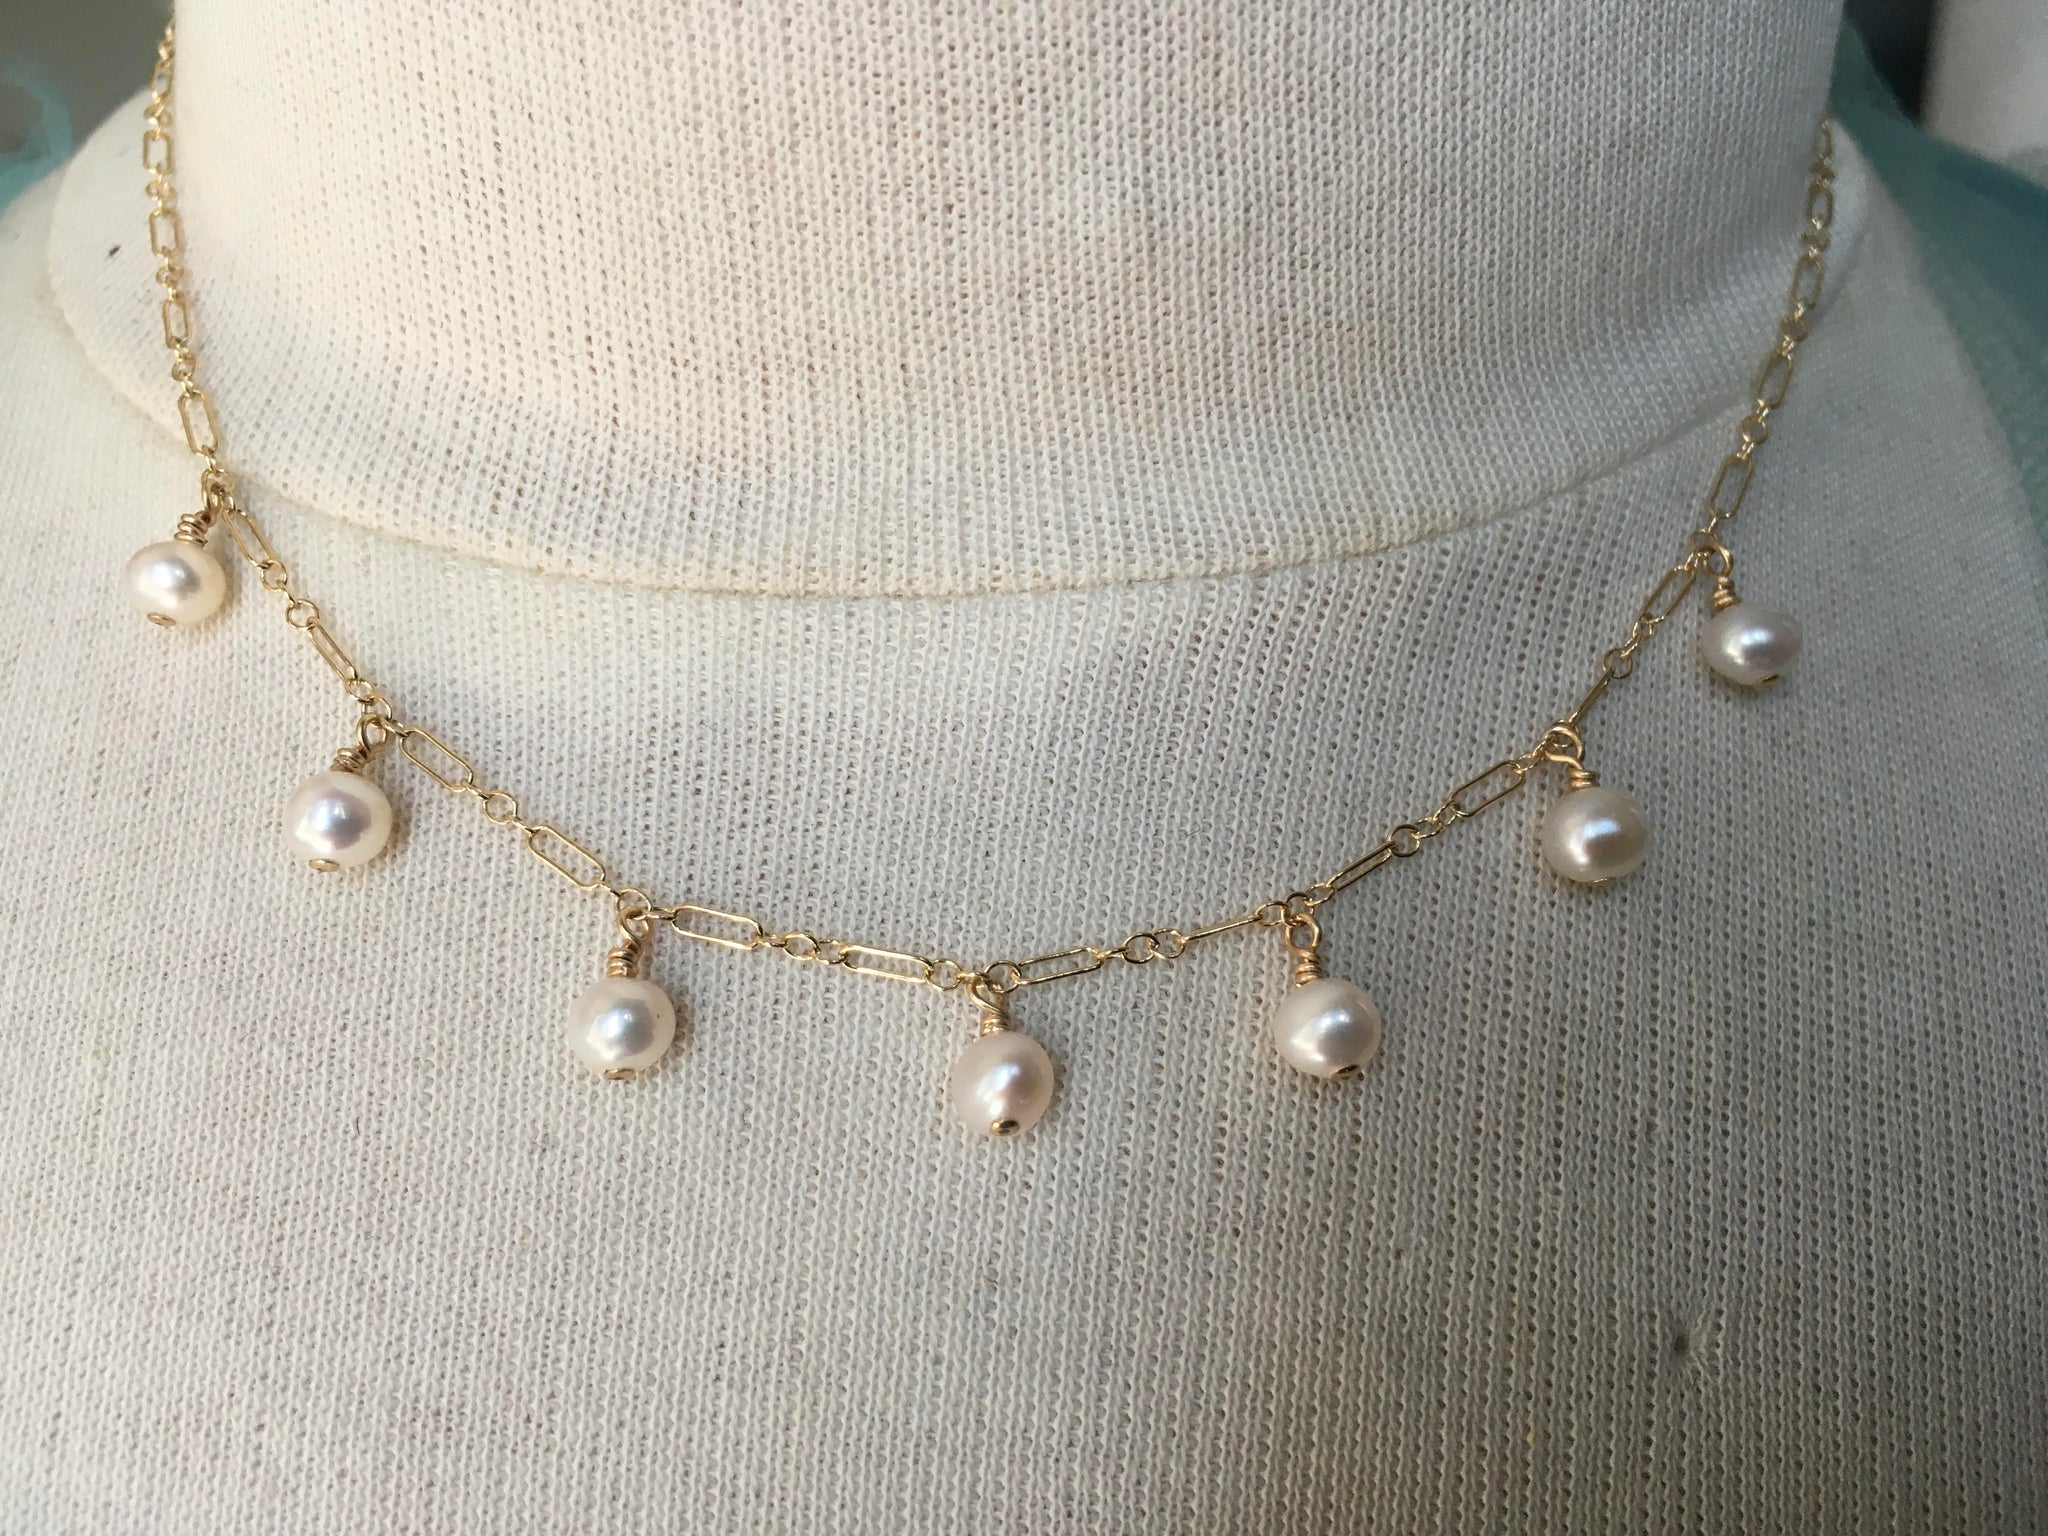 Leighton Gold Pearl Strand Necklace in White Pearl | Kendra Scott